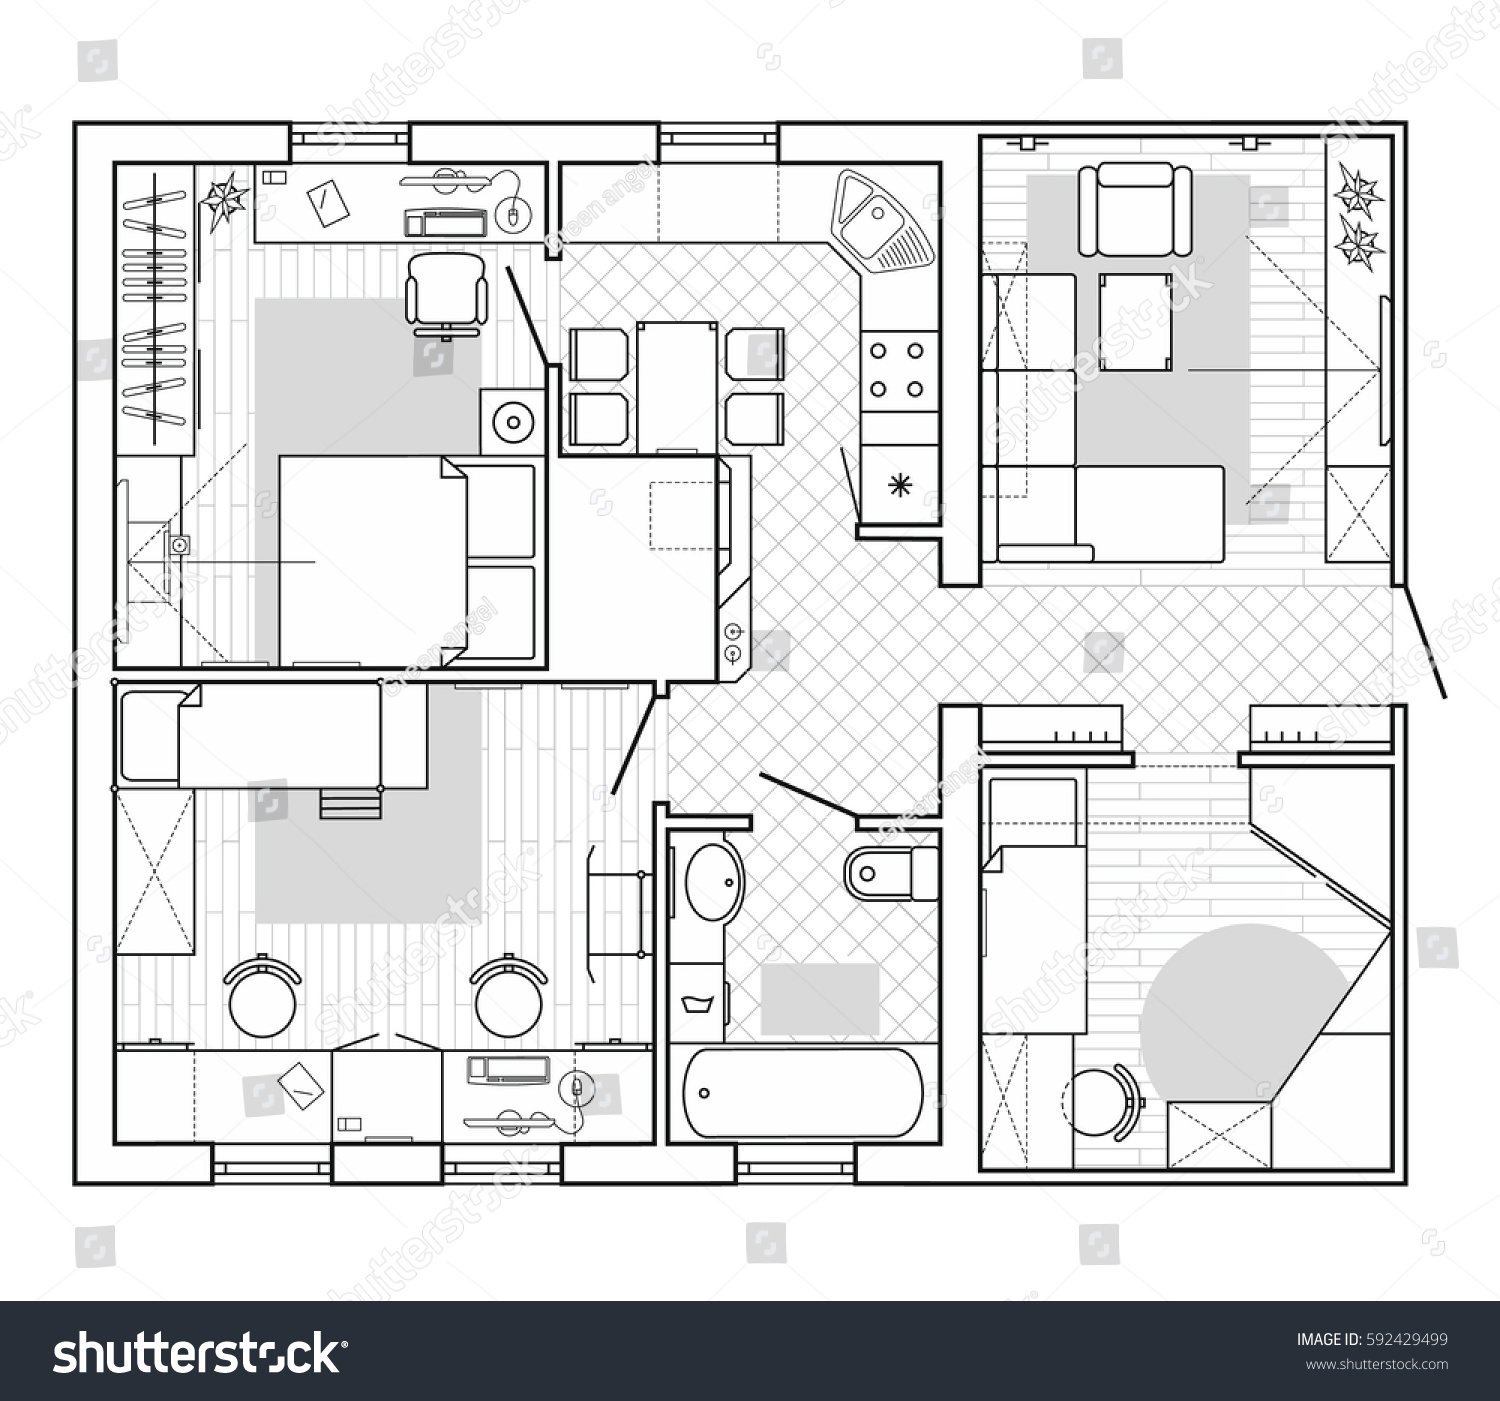 Black White Architectural Plan House Layout Stock Vector 592429499